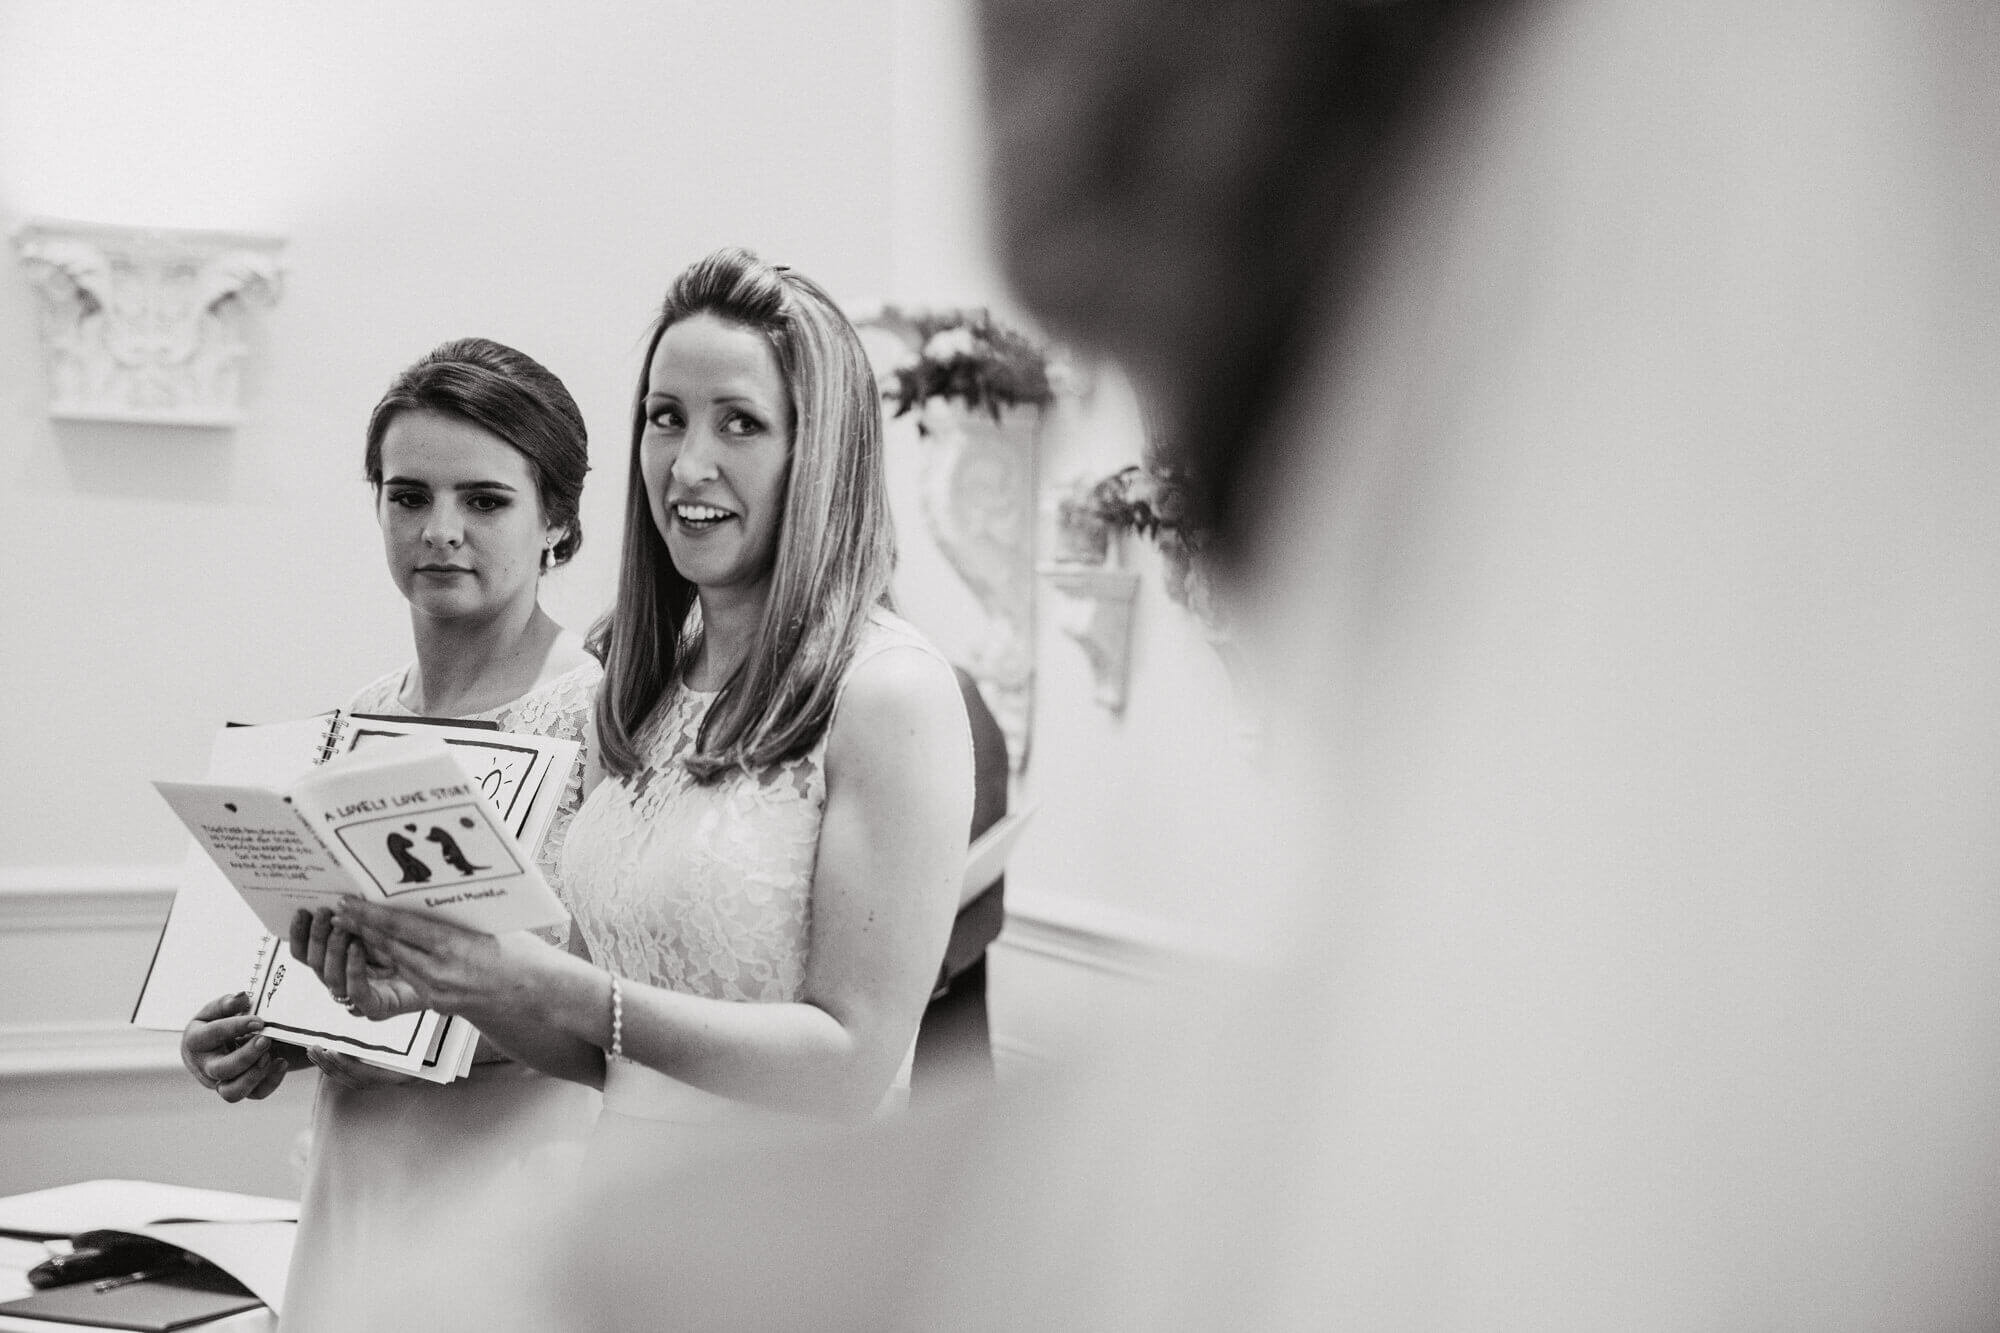 black and white monochrome photography of bridesmaids 'Lovely Love Story' dinosaur book during nuptial service